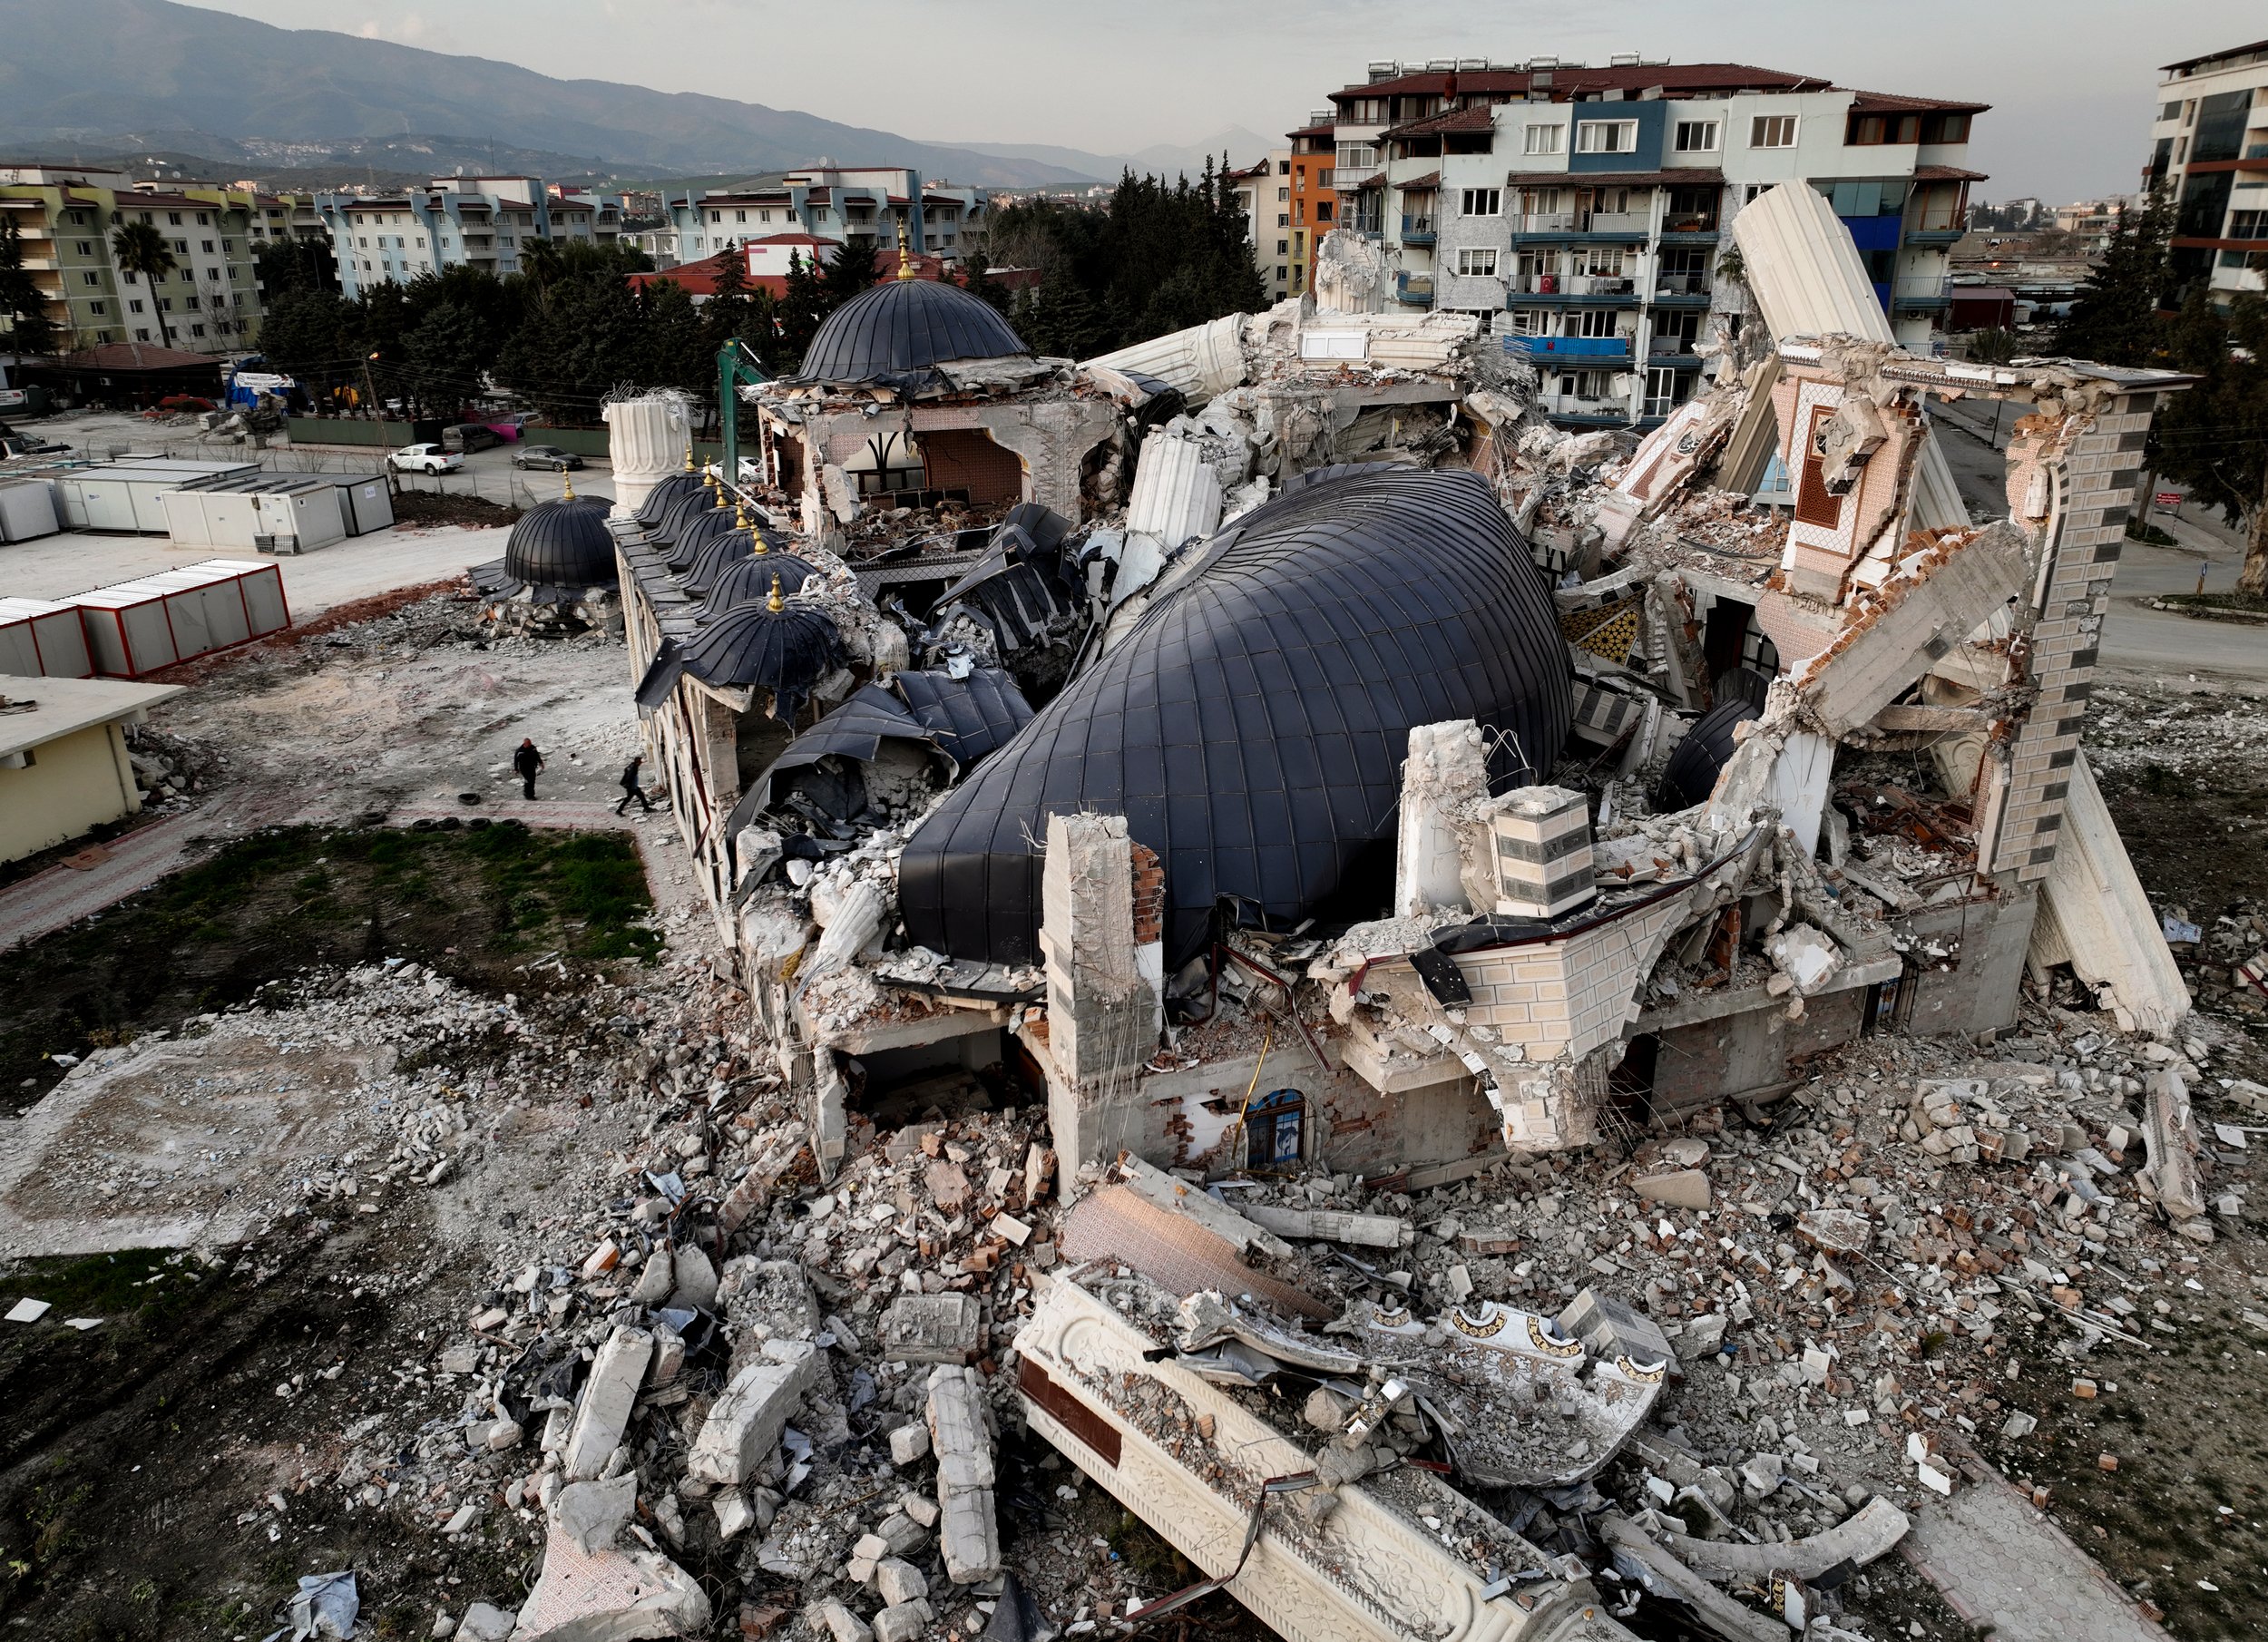  A destroyed mosque in Hatay, Turkey on February 24, 2023. Civilians run inside to recover Qurans and other artifacts after continued earthquakes shake the region. 